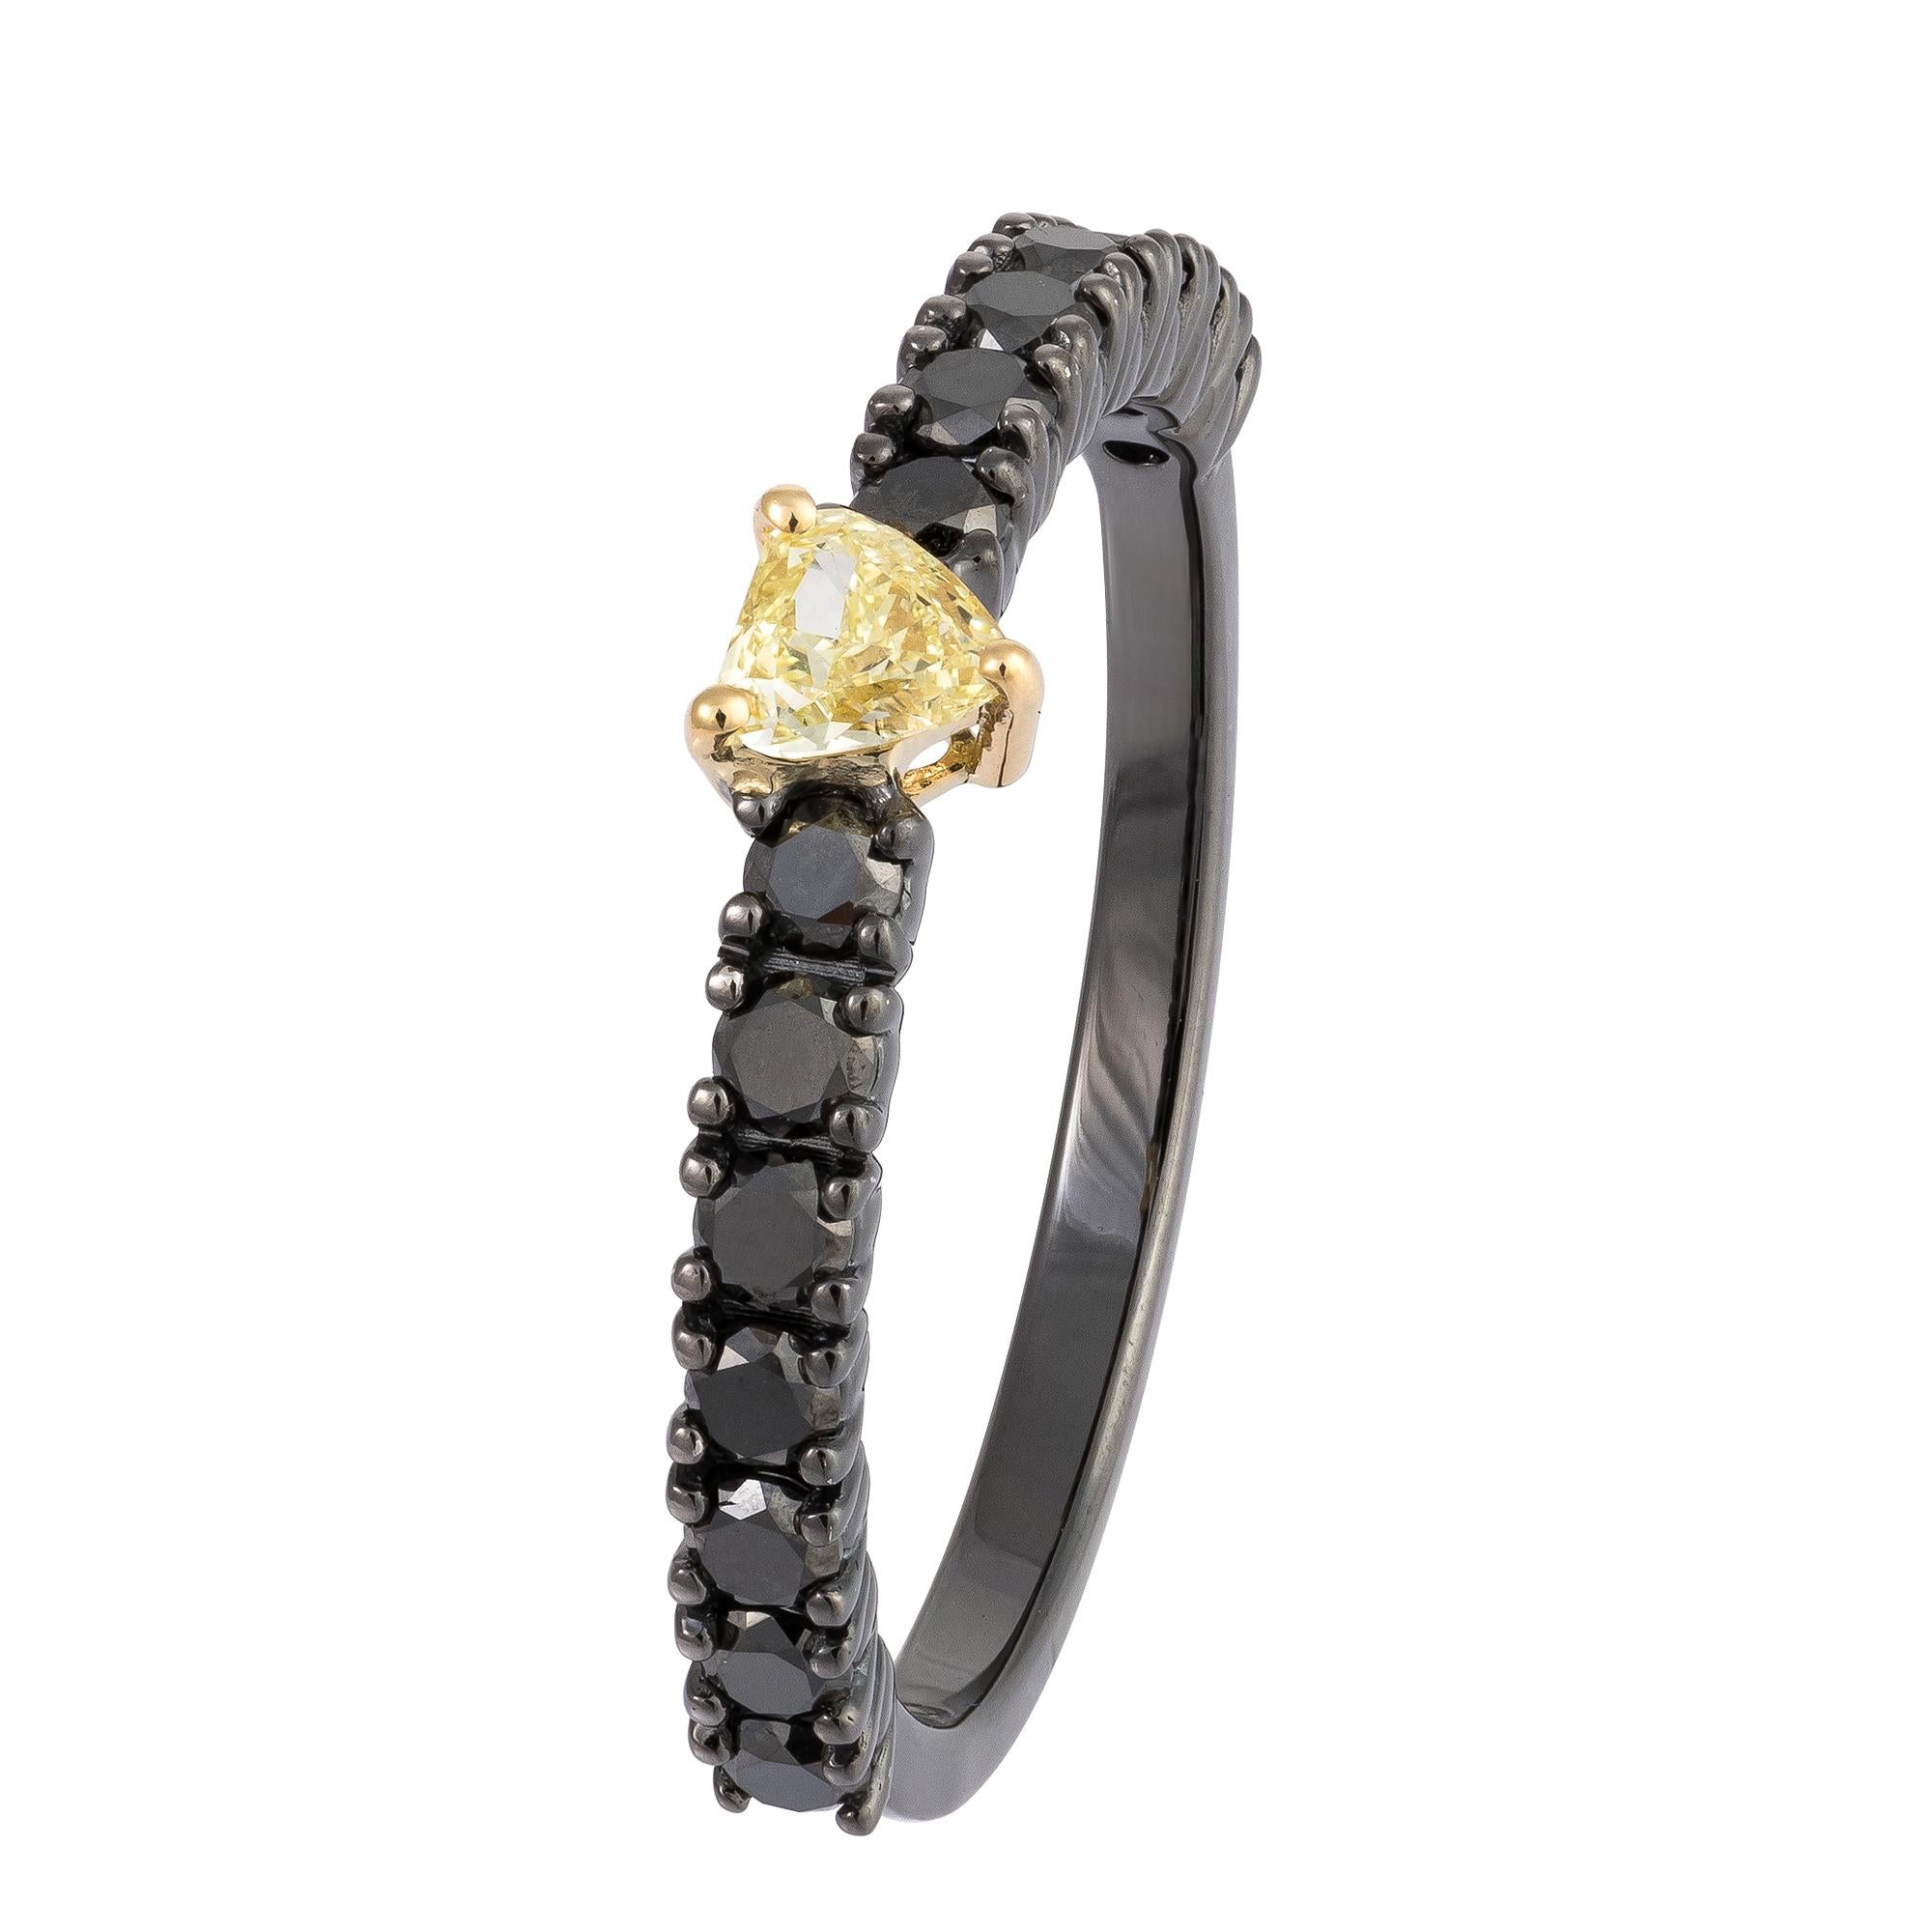 The Following Item we are offering is a Rare 18KT Gold Rare Fancy Yellow Diamond Black Diamond Ring. Beautifully comprised of Finely Set Gorgeous Yellow Diamond Heart Shaped Diamond and adorned with Shimmering Black Diamonds!! T.C.W. Approx .75CTS. 